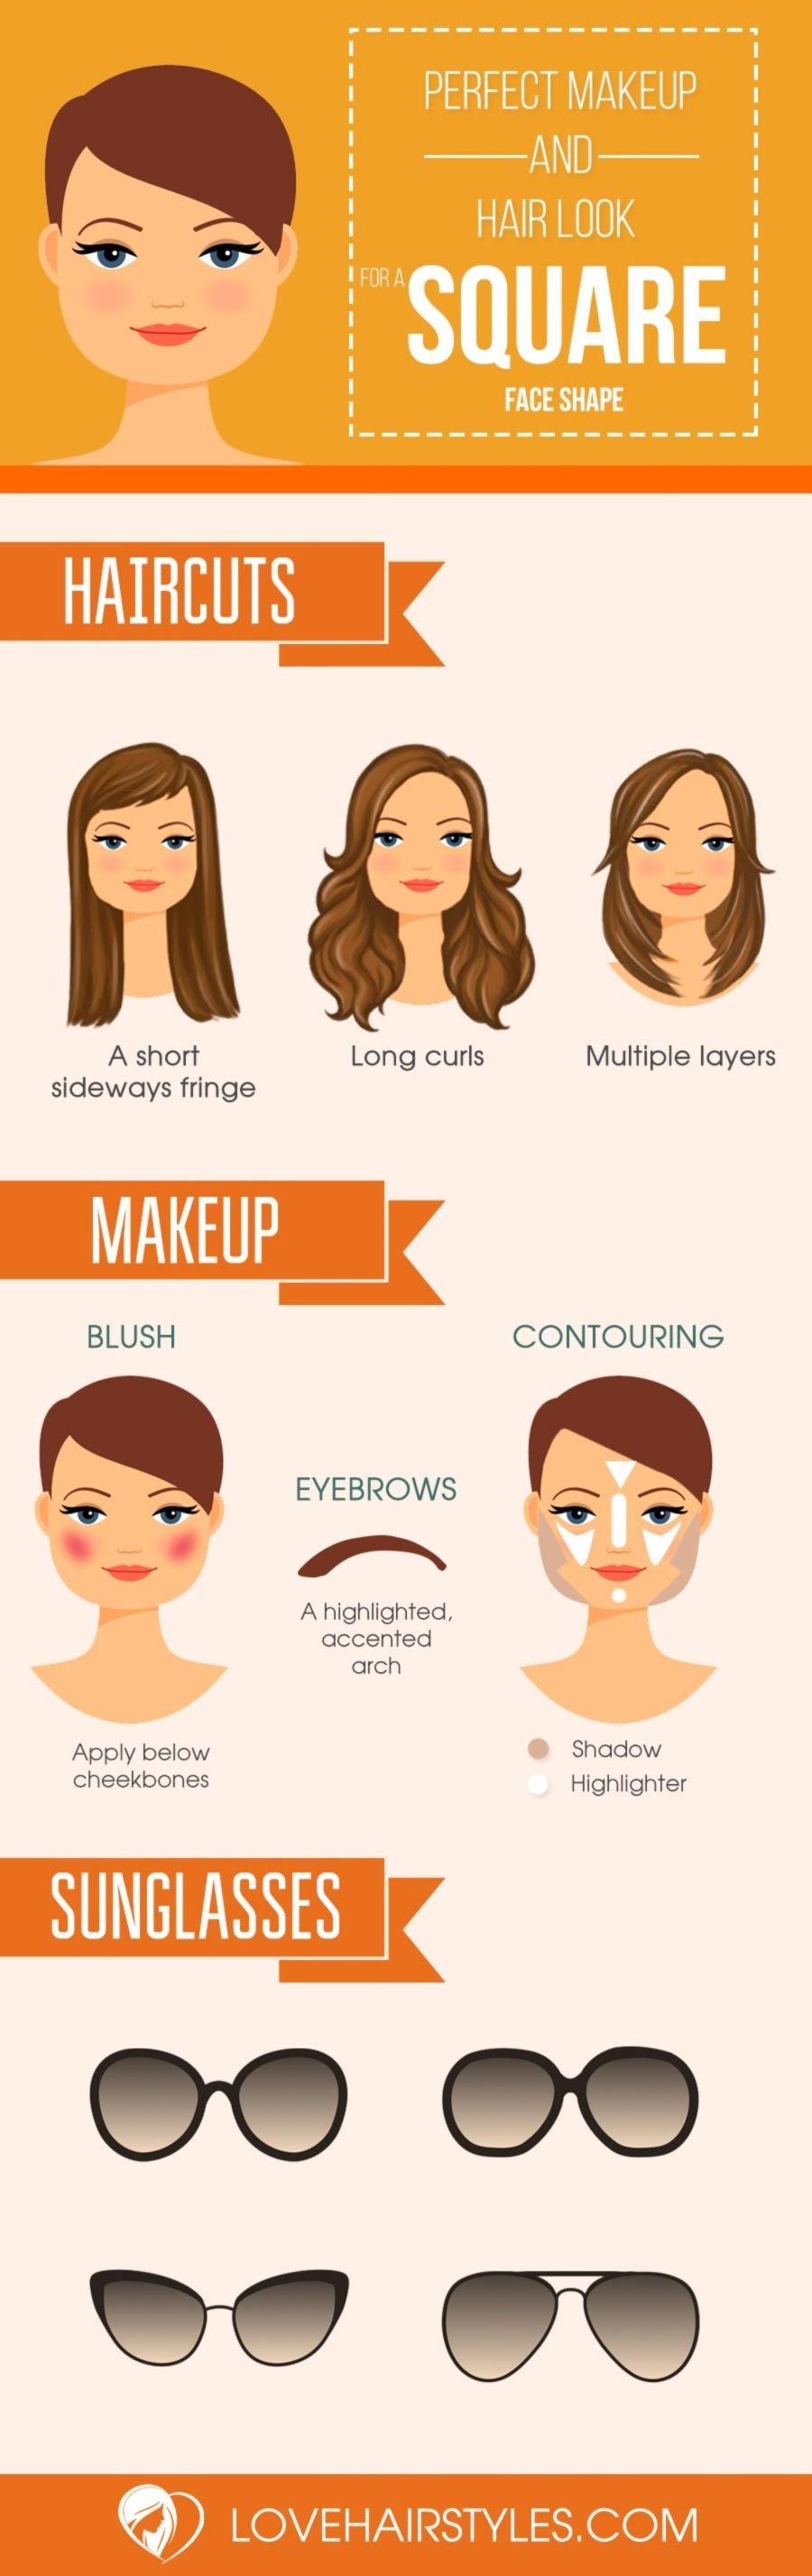 10 Sexy Hairstyles For Square Faces | Makeup | Pinterest | Squares regarding Hairstyle For Square Face Pinterest